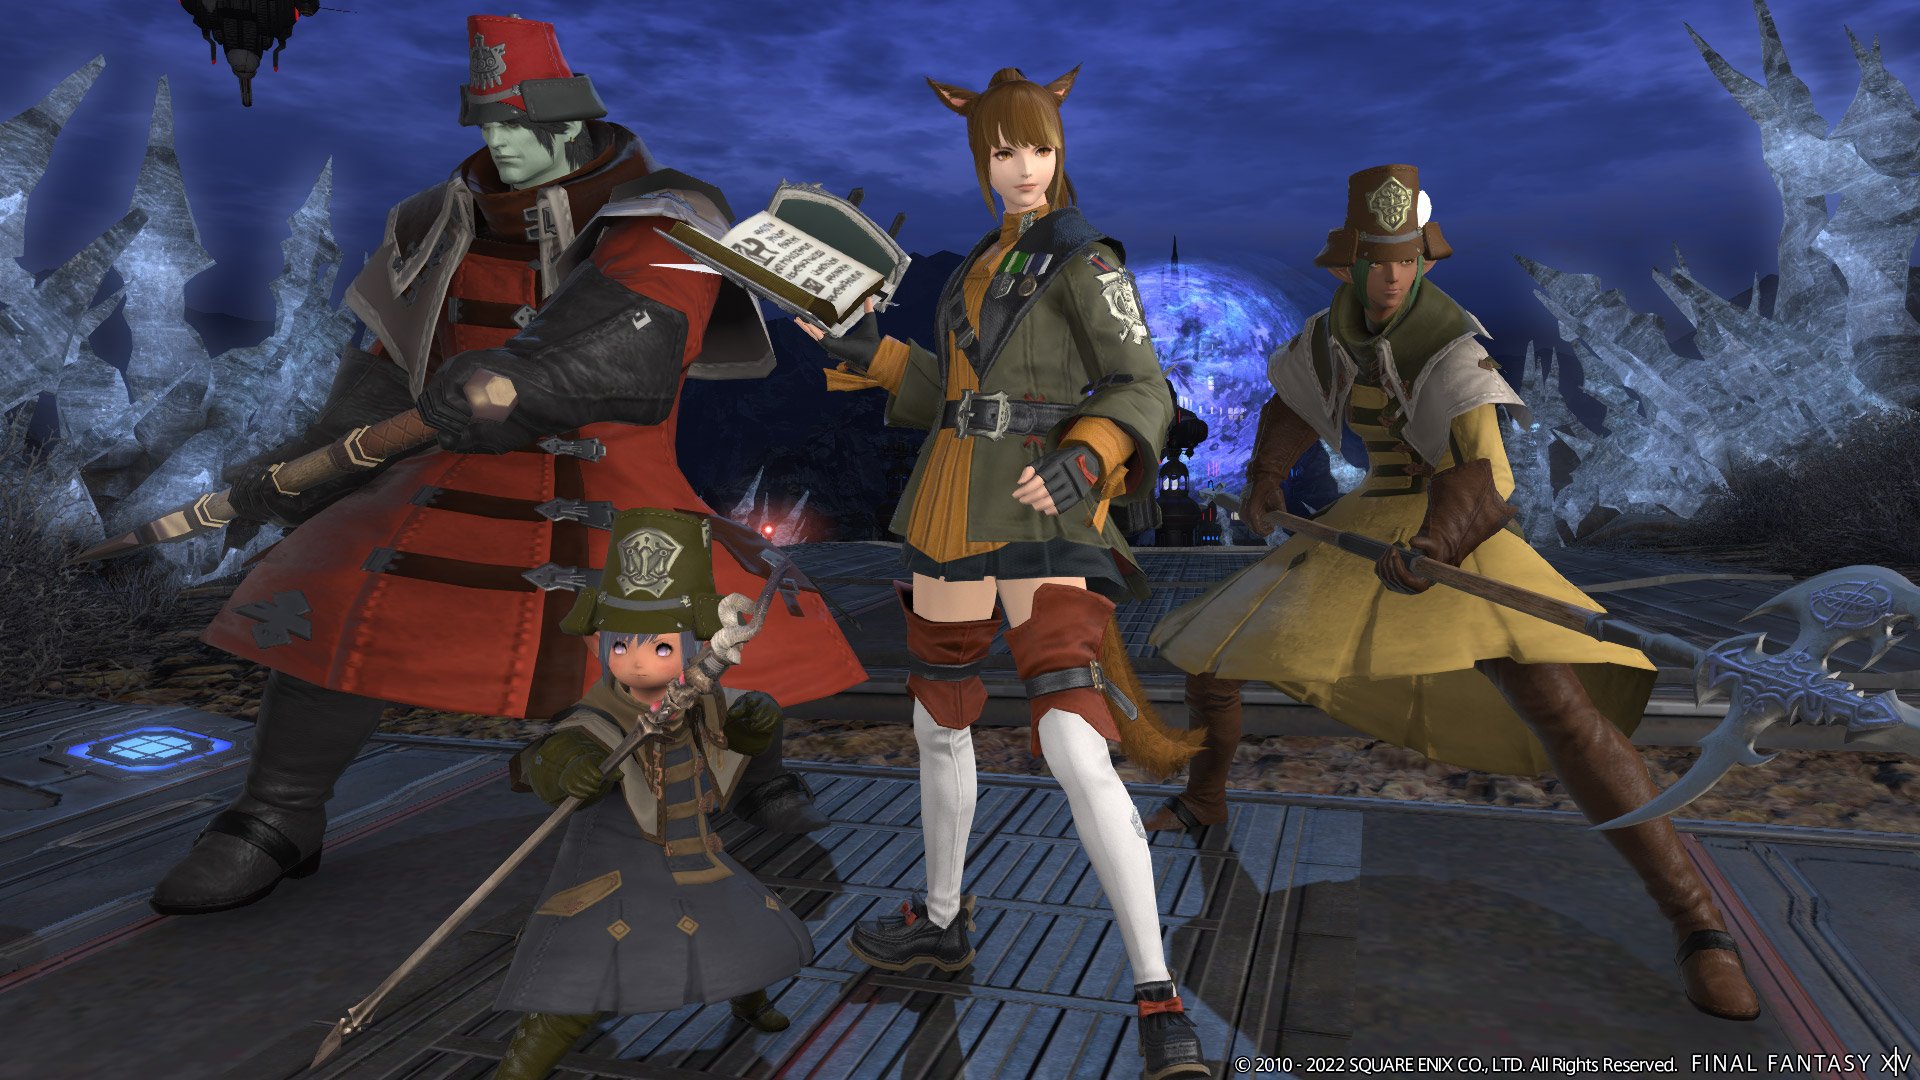 Final Fantasy 14's latest patch adds NPC support for solo players | VGC